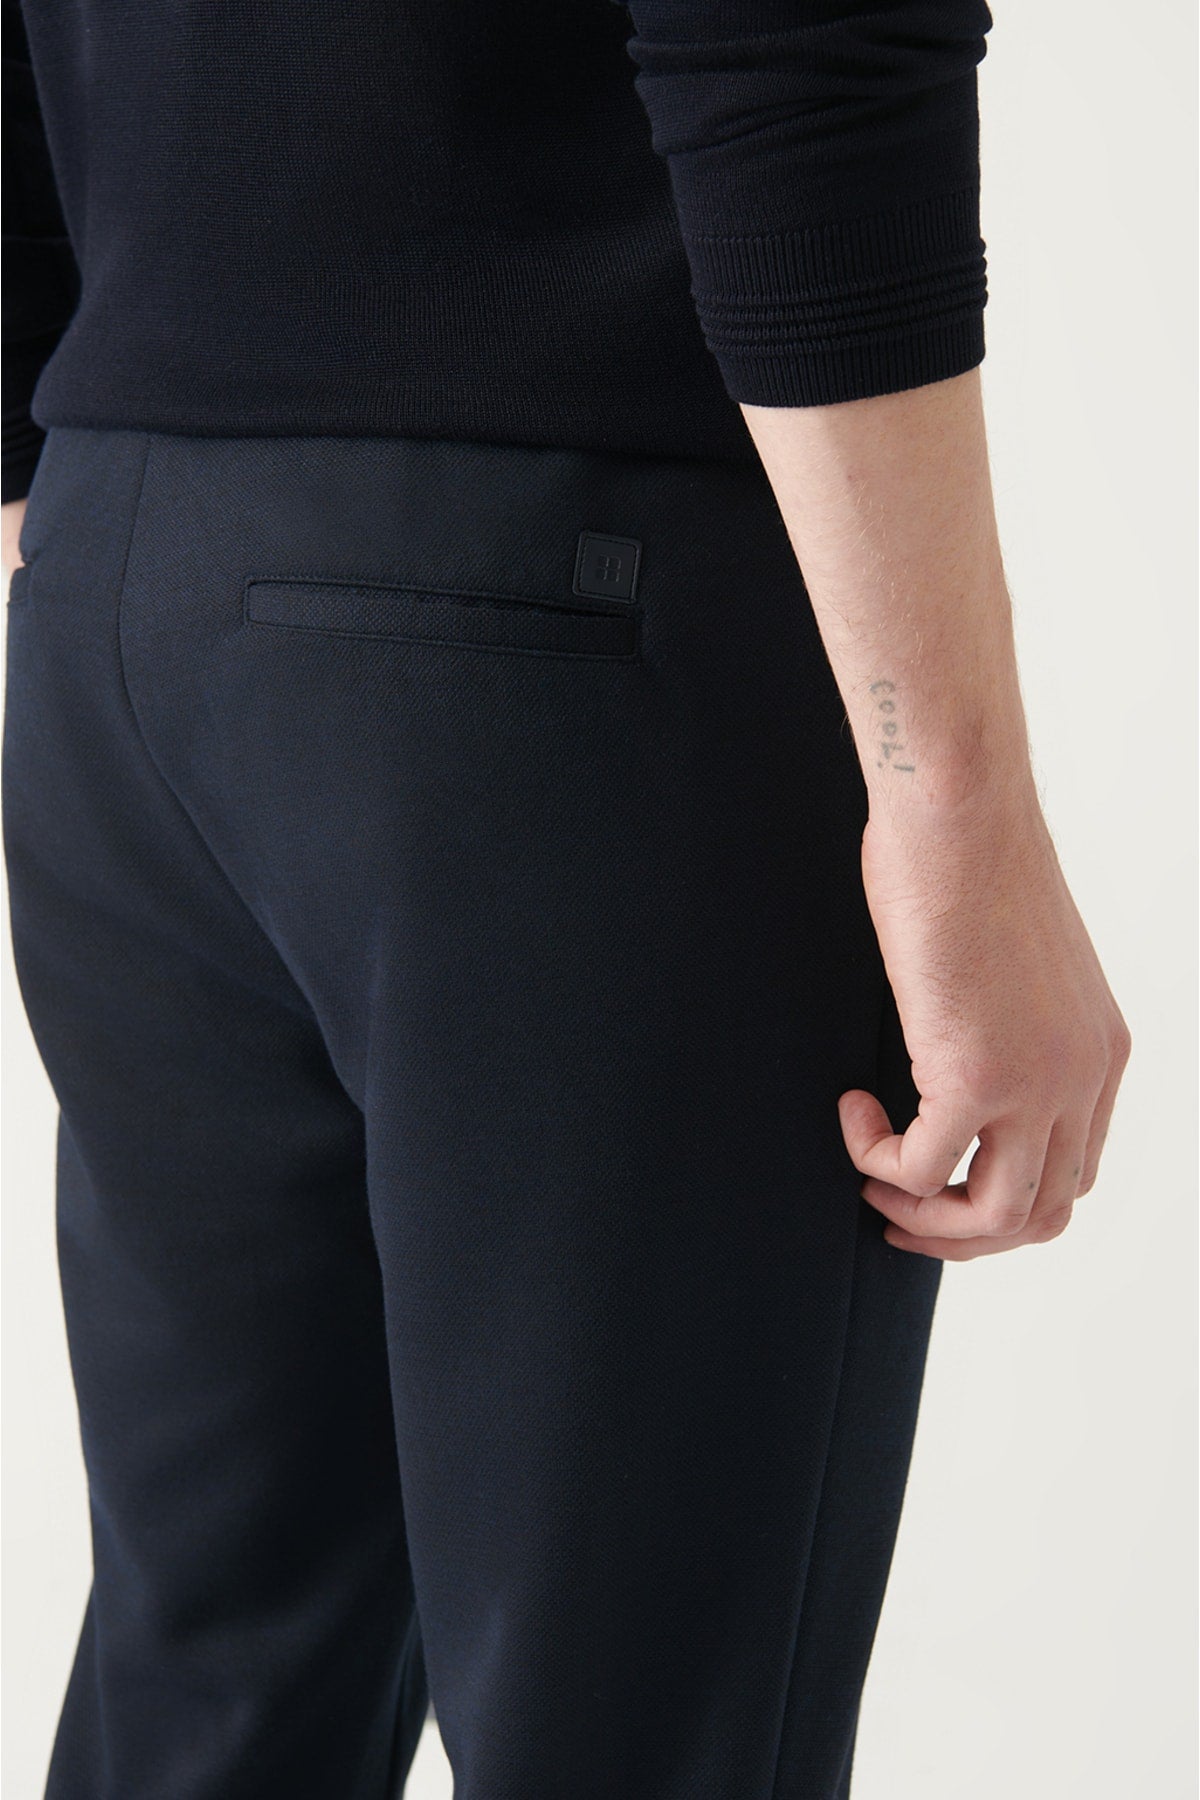 Men's navy blue knitted relaxed fit jogger pants a31y3027